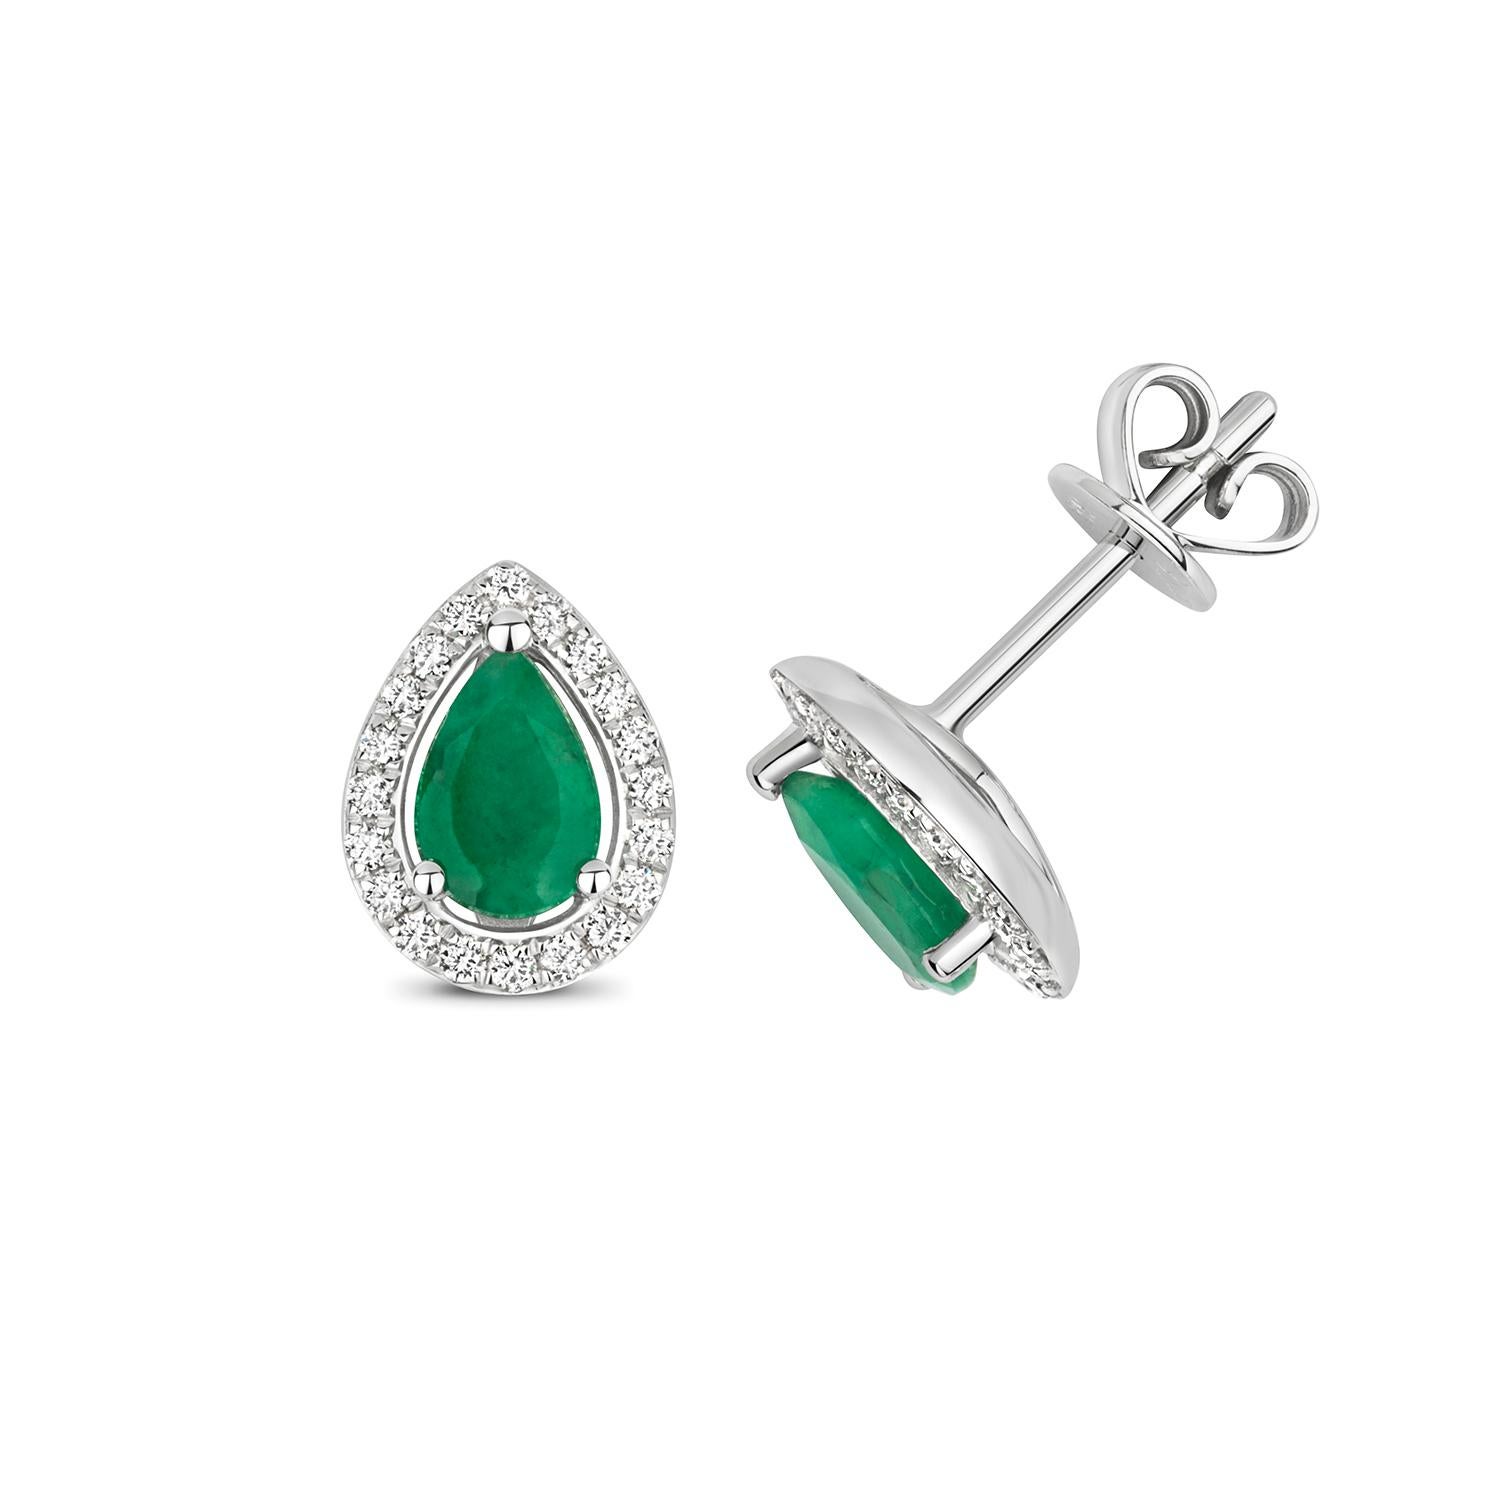 DIAMOND AND EMERALD HALO STUDS PEAR

9K W/G 40RD/0.17EMD/0.76

Weight: 1.4g

Number Of Stones:2+40

Total Carates:0.760+0.170